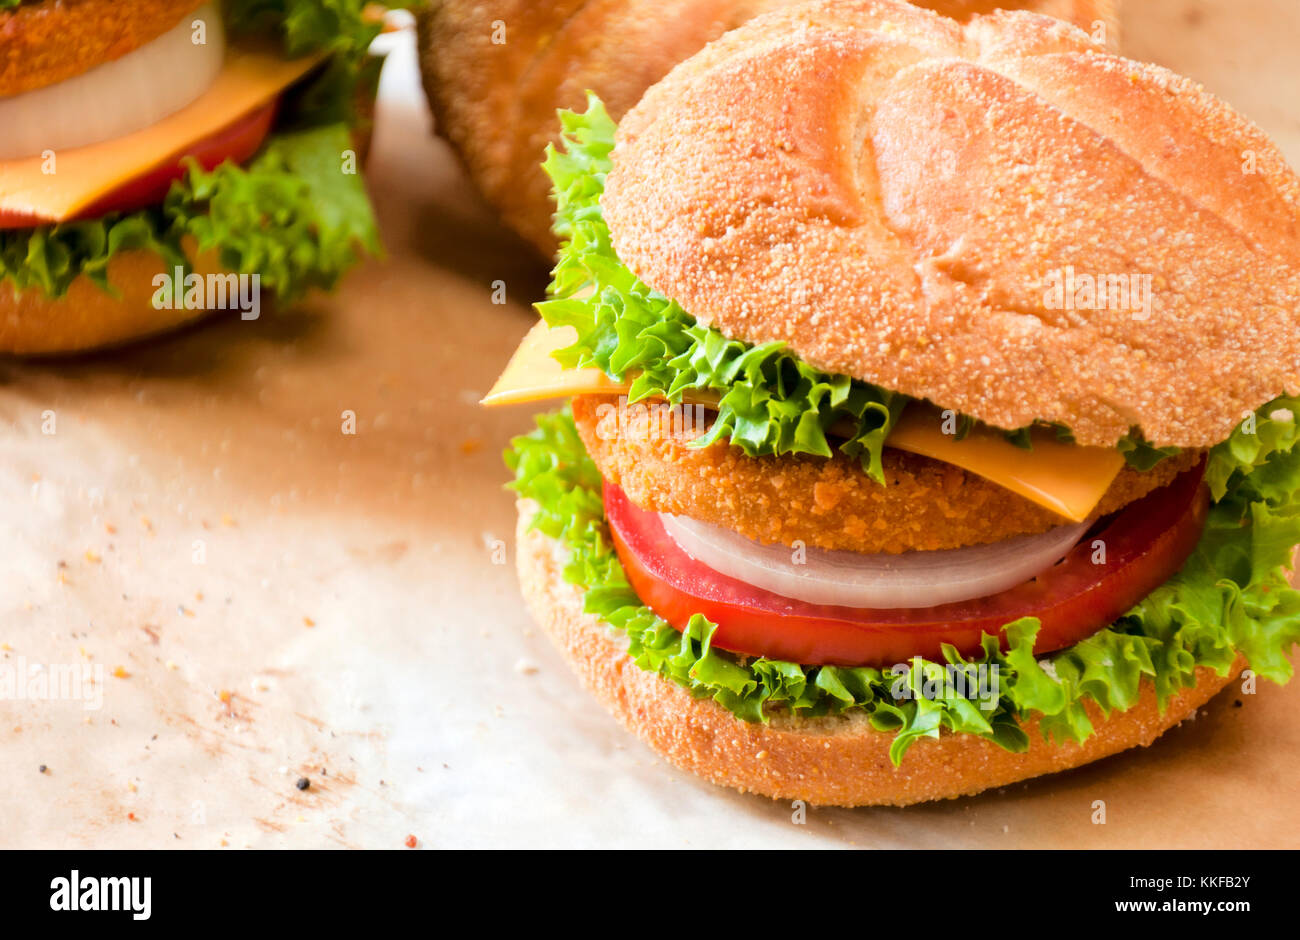 Close up to fishburger and fresh vegetables Stock Photo